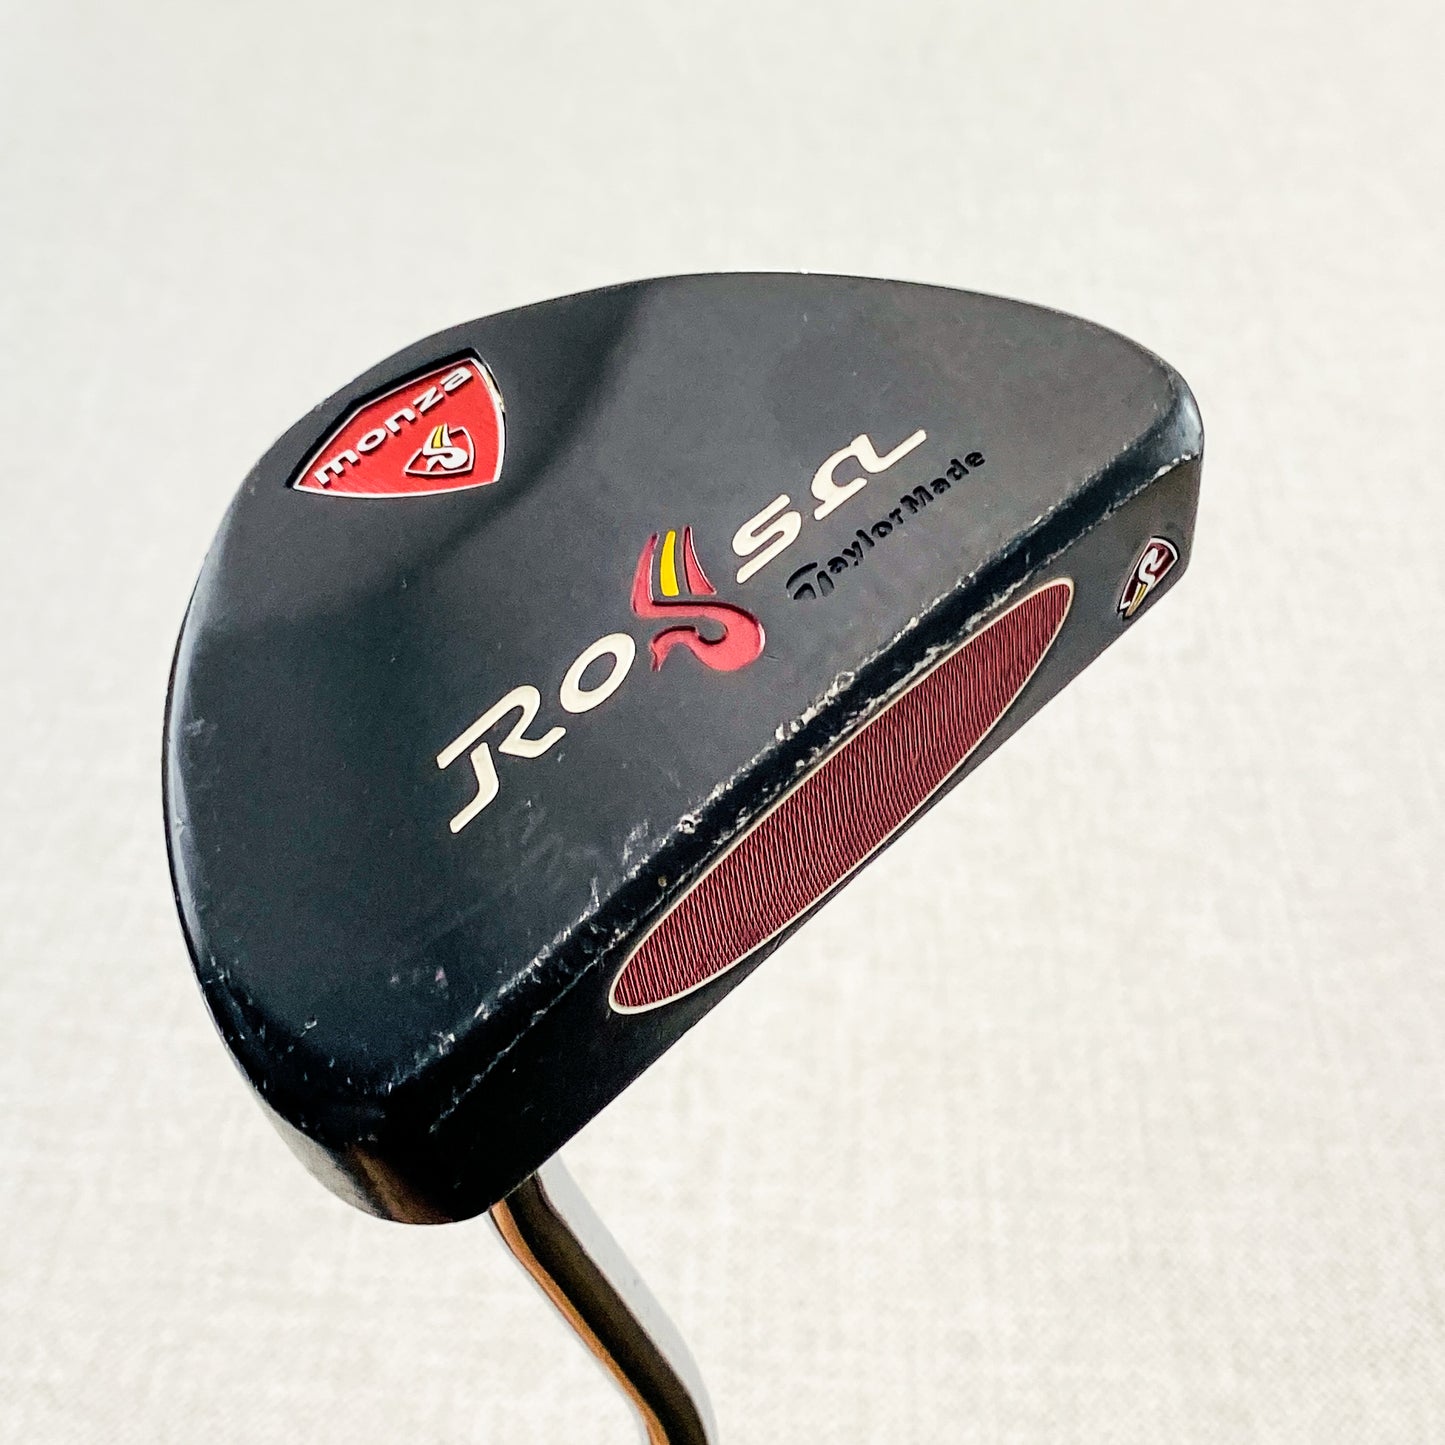 TaylorMade Rossa Monza Putter. 34 inch - Good Condition # T508